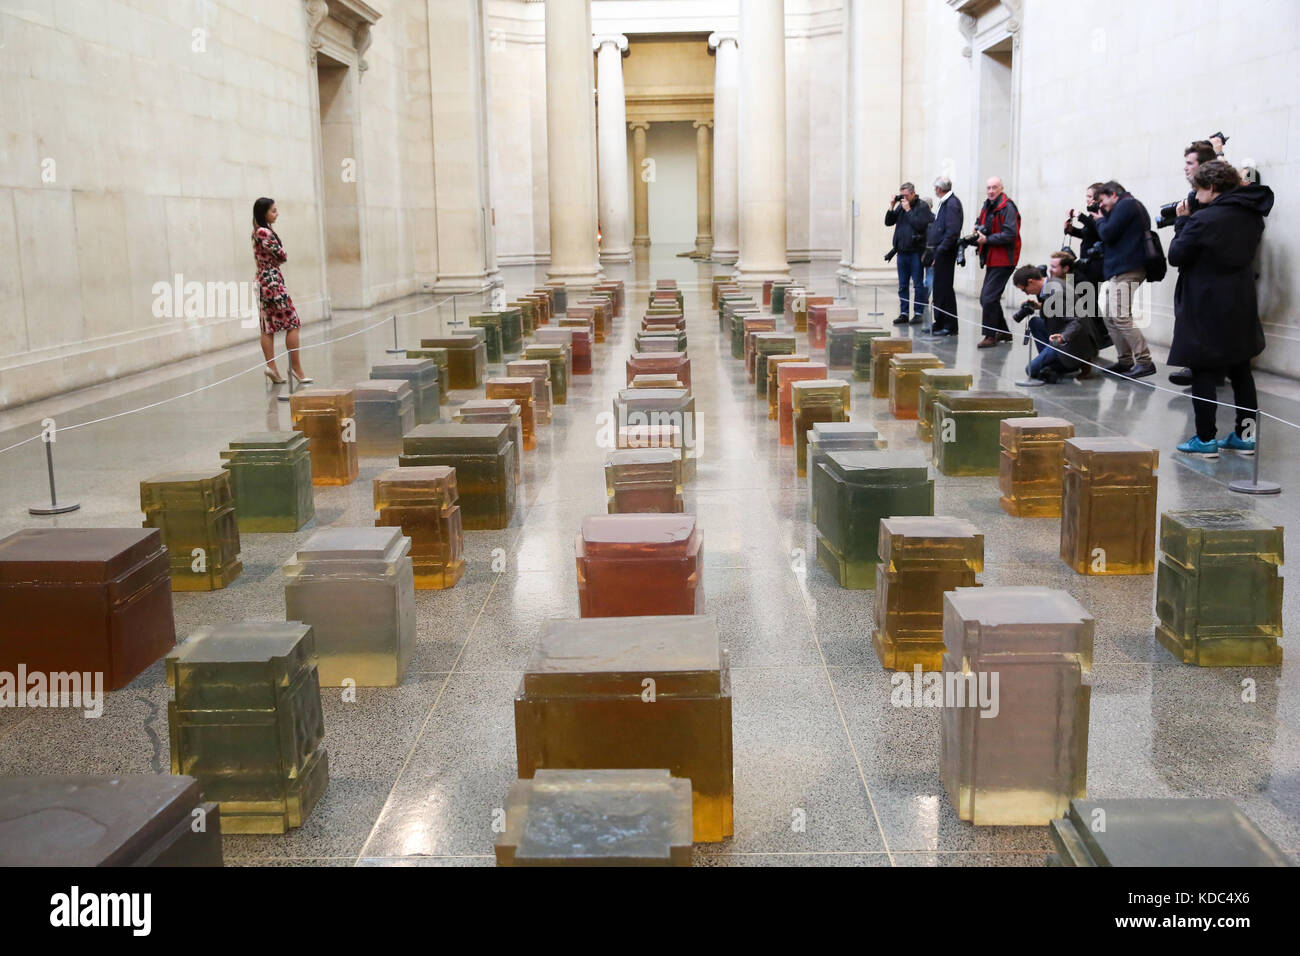 One of the leading artists of her generation, the exhibition reveal the extraordinary breadth of Rachel Whiteread’s career over three decades. From the four early sculptures shown in her first solo show in 1988 to works made this year especially for Tate Britain. 'Rachel Whiteread' is at Tate Britain from 12 September 2017 to 21 January 2018.  Where: London, United Kingdom When: 11 Sep 2017 Credit: Dinendra Haria/WENN.com Stock Photo